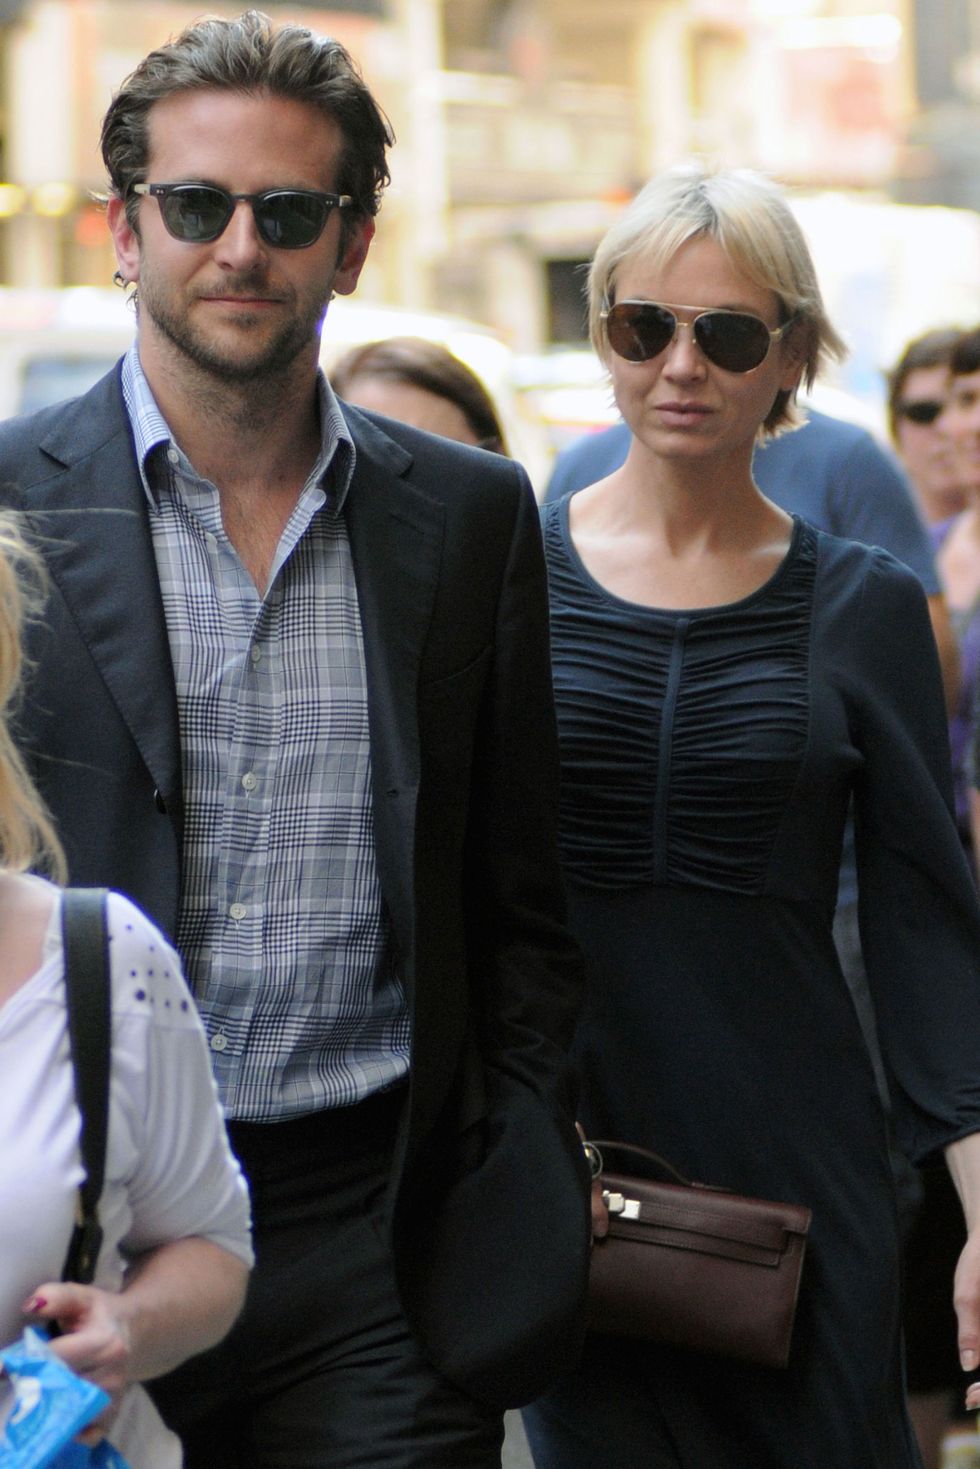 <p>The former couple <a href="http://www.usmagazine.com/celebrity-news/news/the-many-loves-of-bradley-cooper-201341" data-tracking-id="recirc-text-link">met on the set</a> of the 2006 thriller&nbsp;<em data-verified="redactor" data-redactor-tag="em">Case 39</em><span class="redactor-invisible-space" data-verified="redactor" data-redactor-tag="span" data-redactor-class="redactor-invisible-space">. They called it quits in March 2011.&nbsp;</span></p>